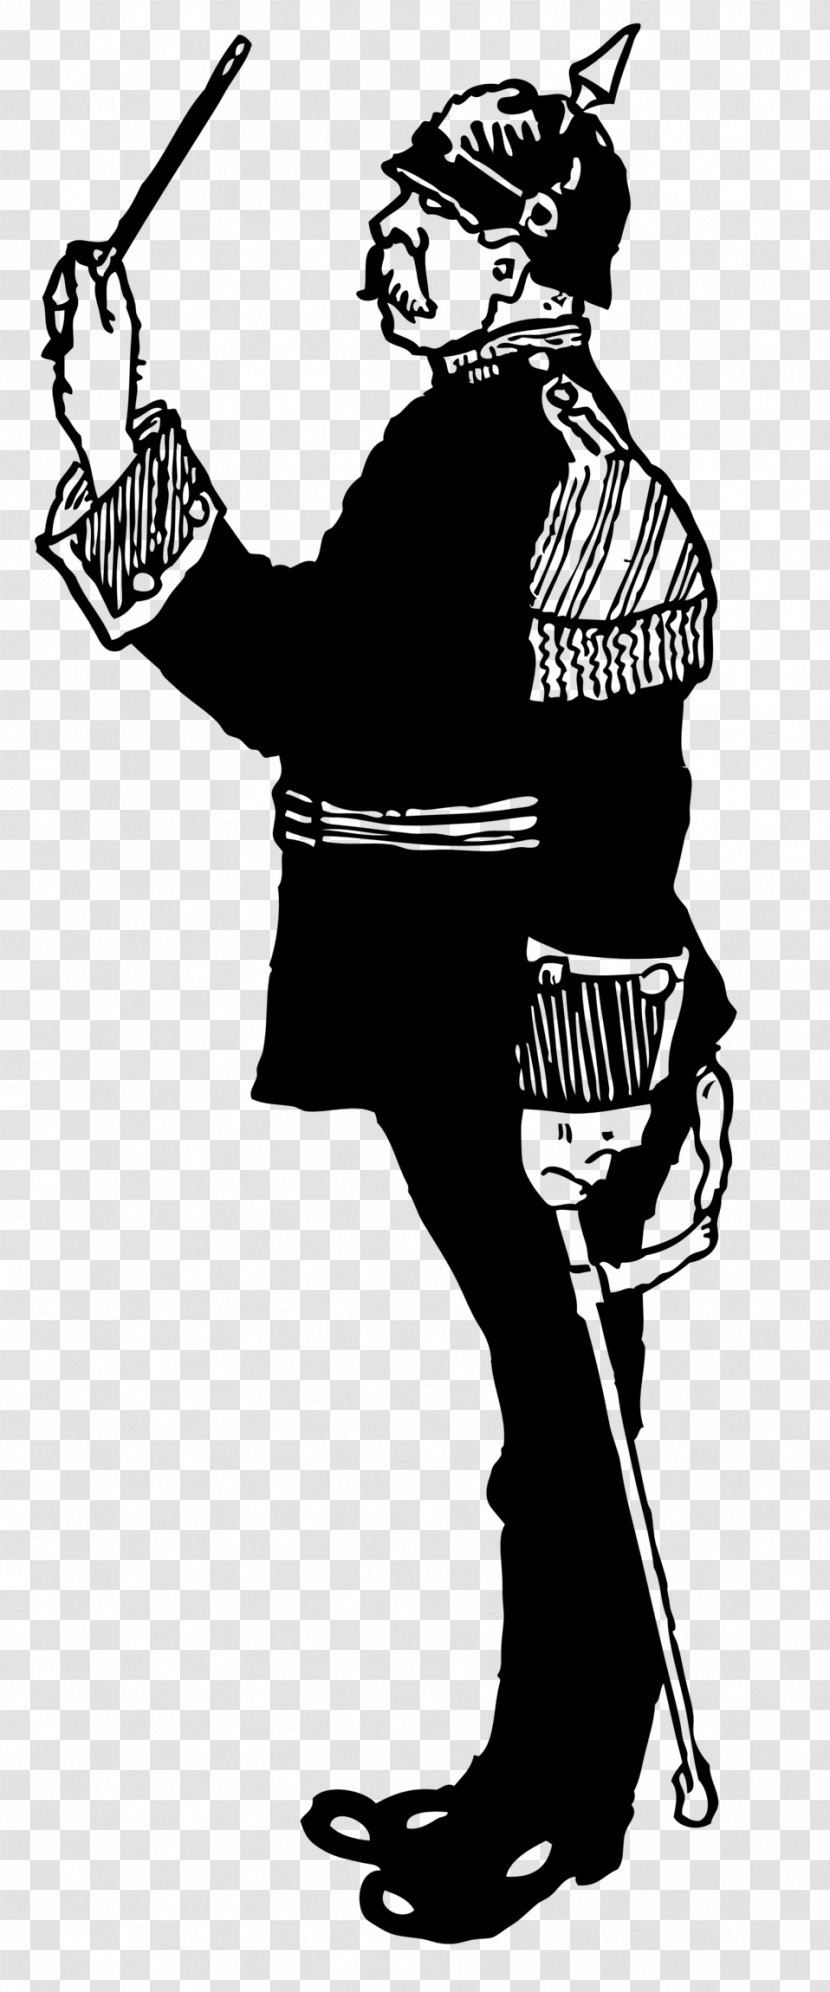 Soldier Military Clip Art - Black And White Transparent PNG